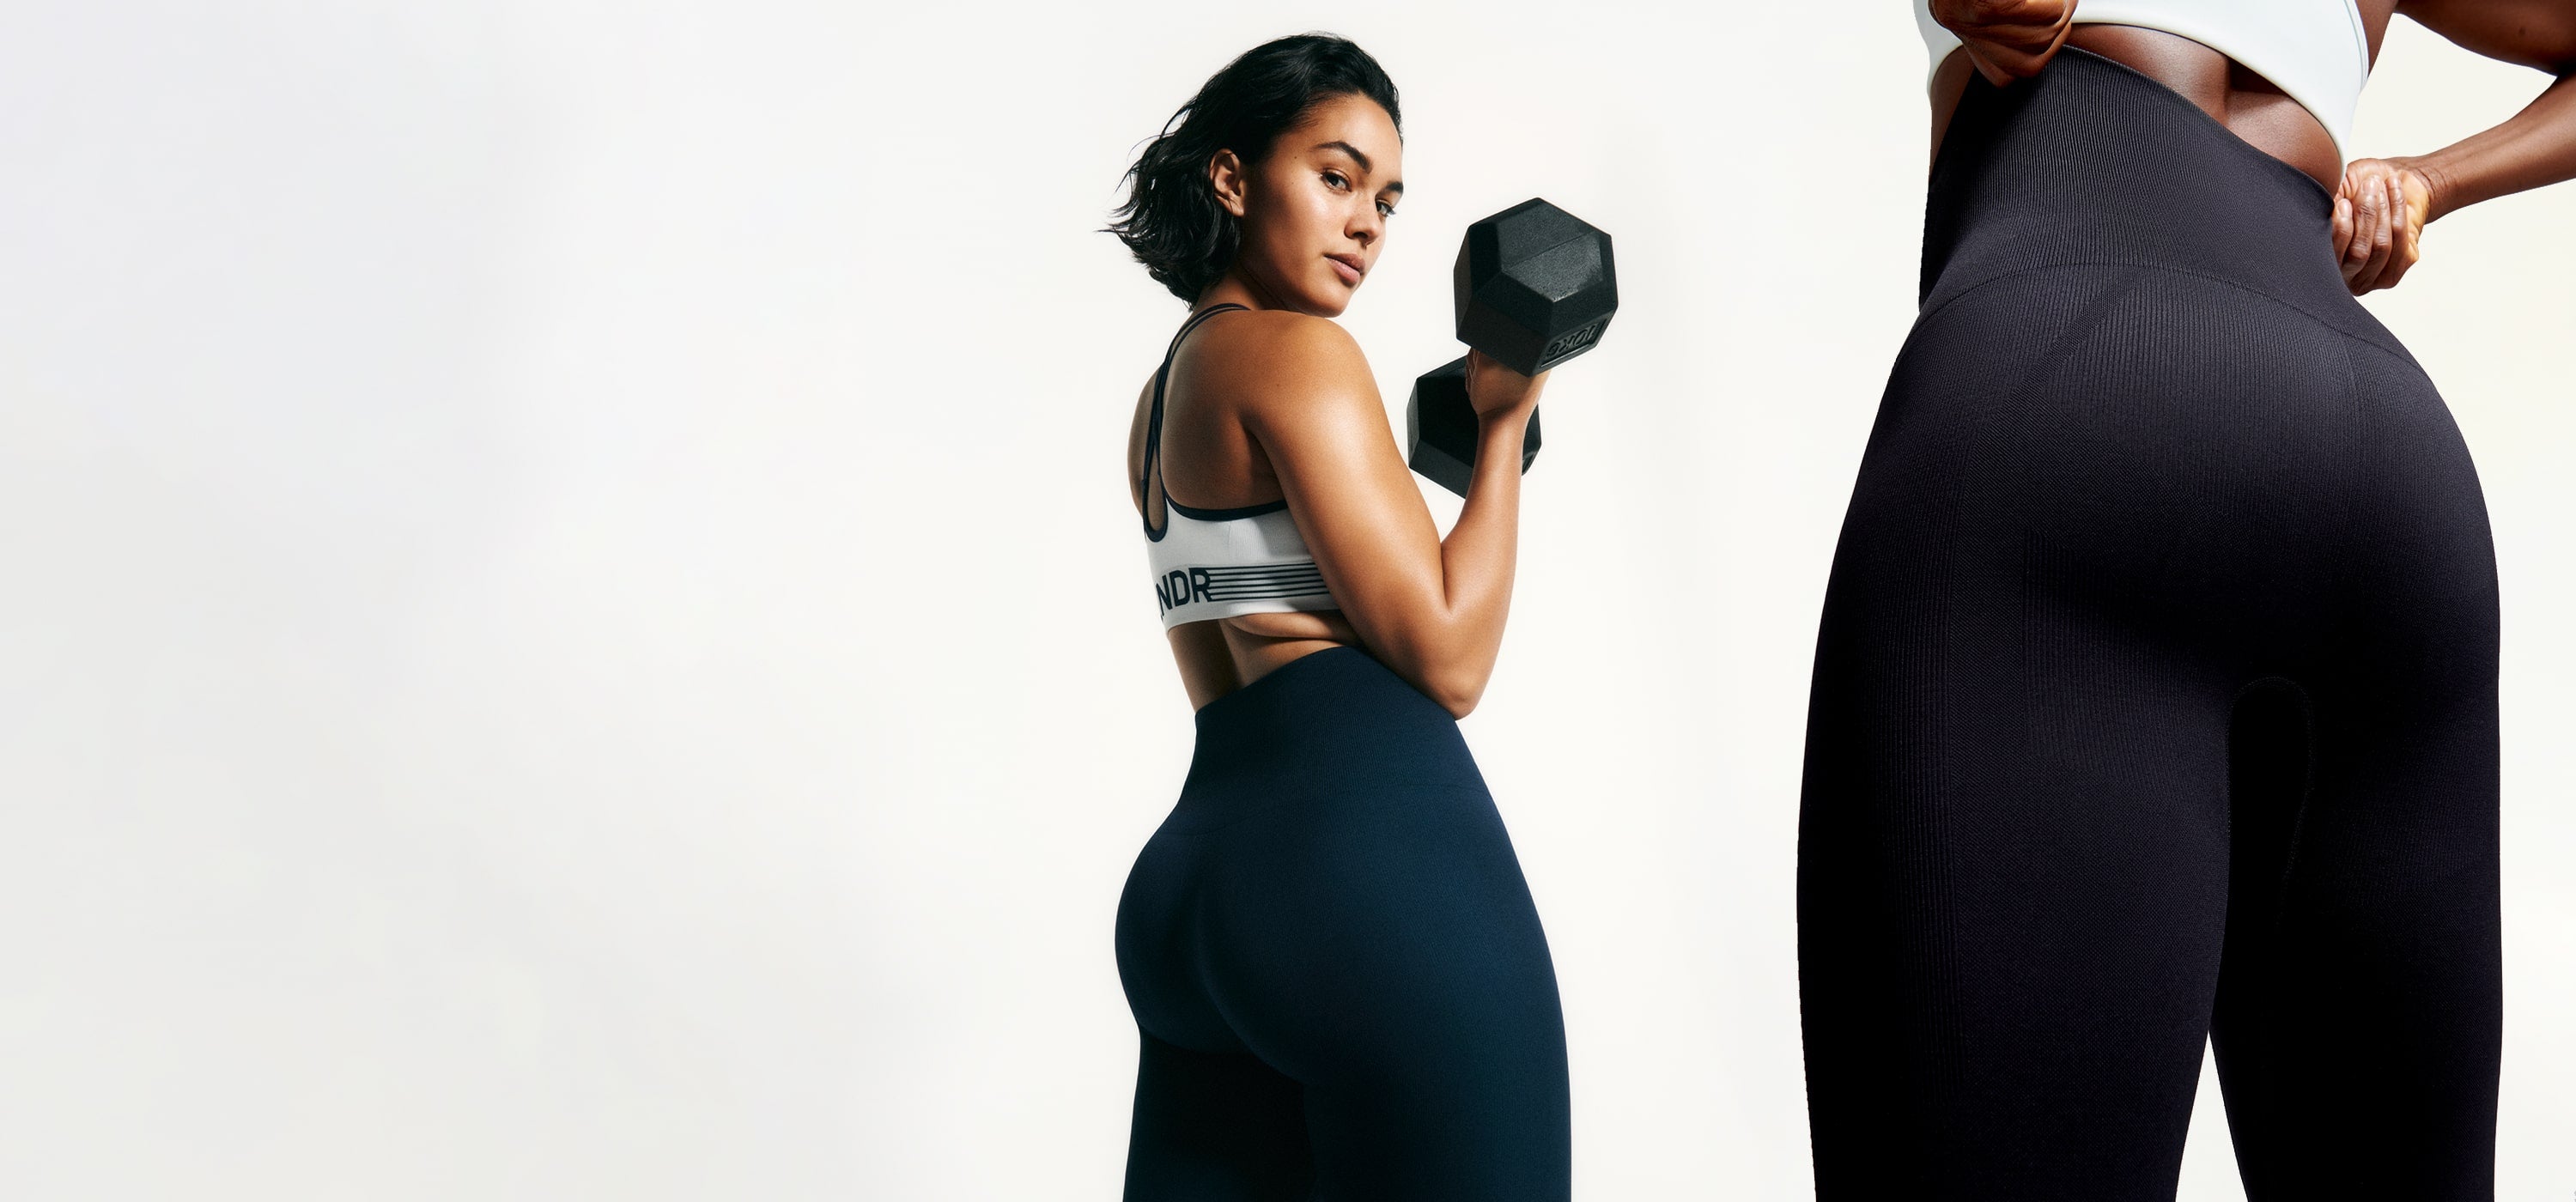 Better Than Lululemon? Why LNDR Activewear Should Be Your New Go